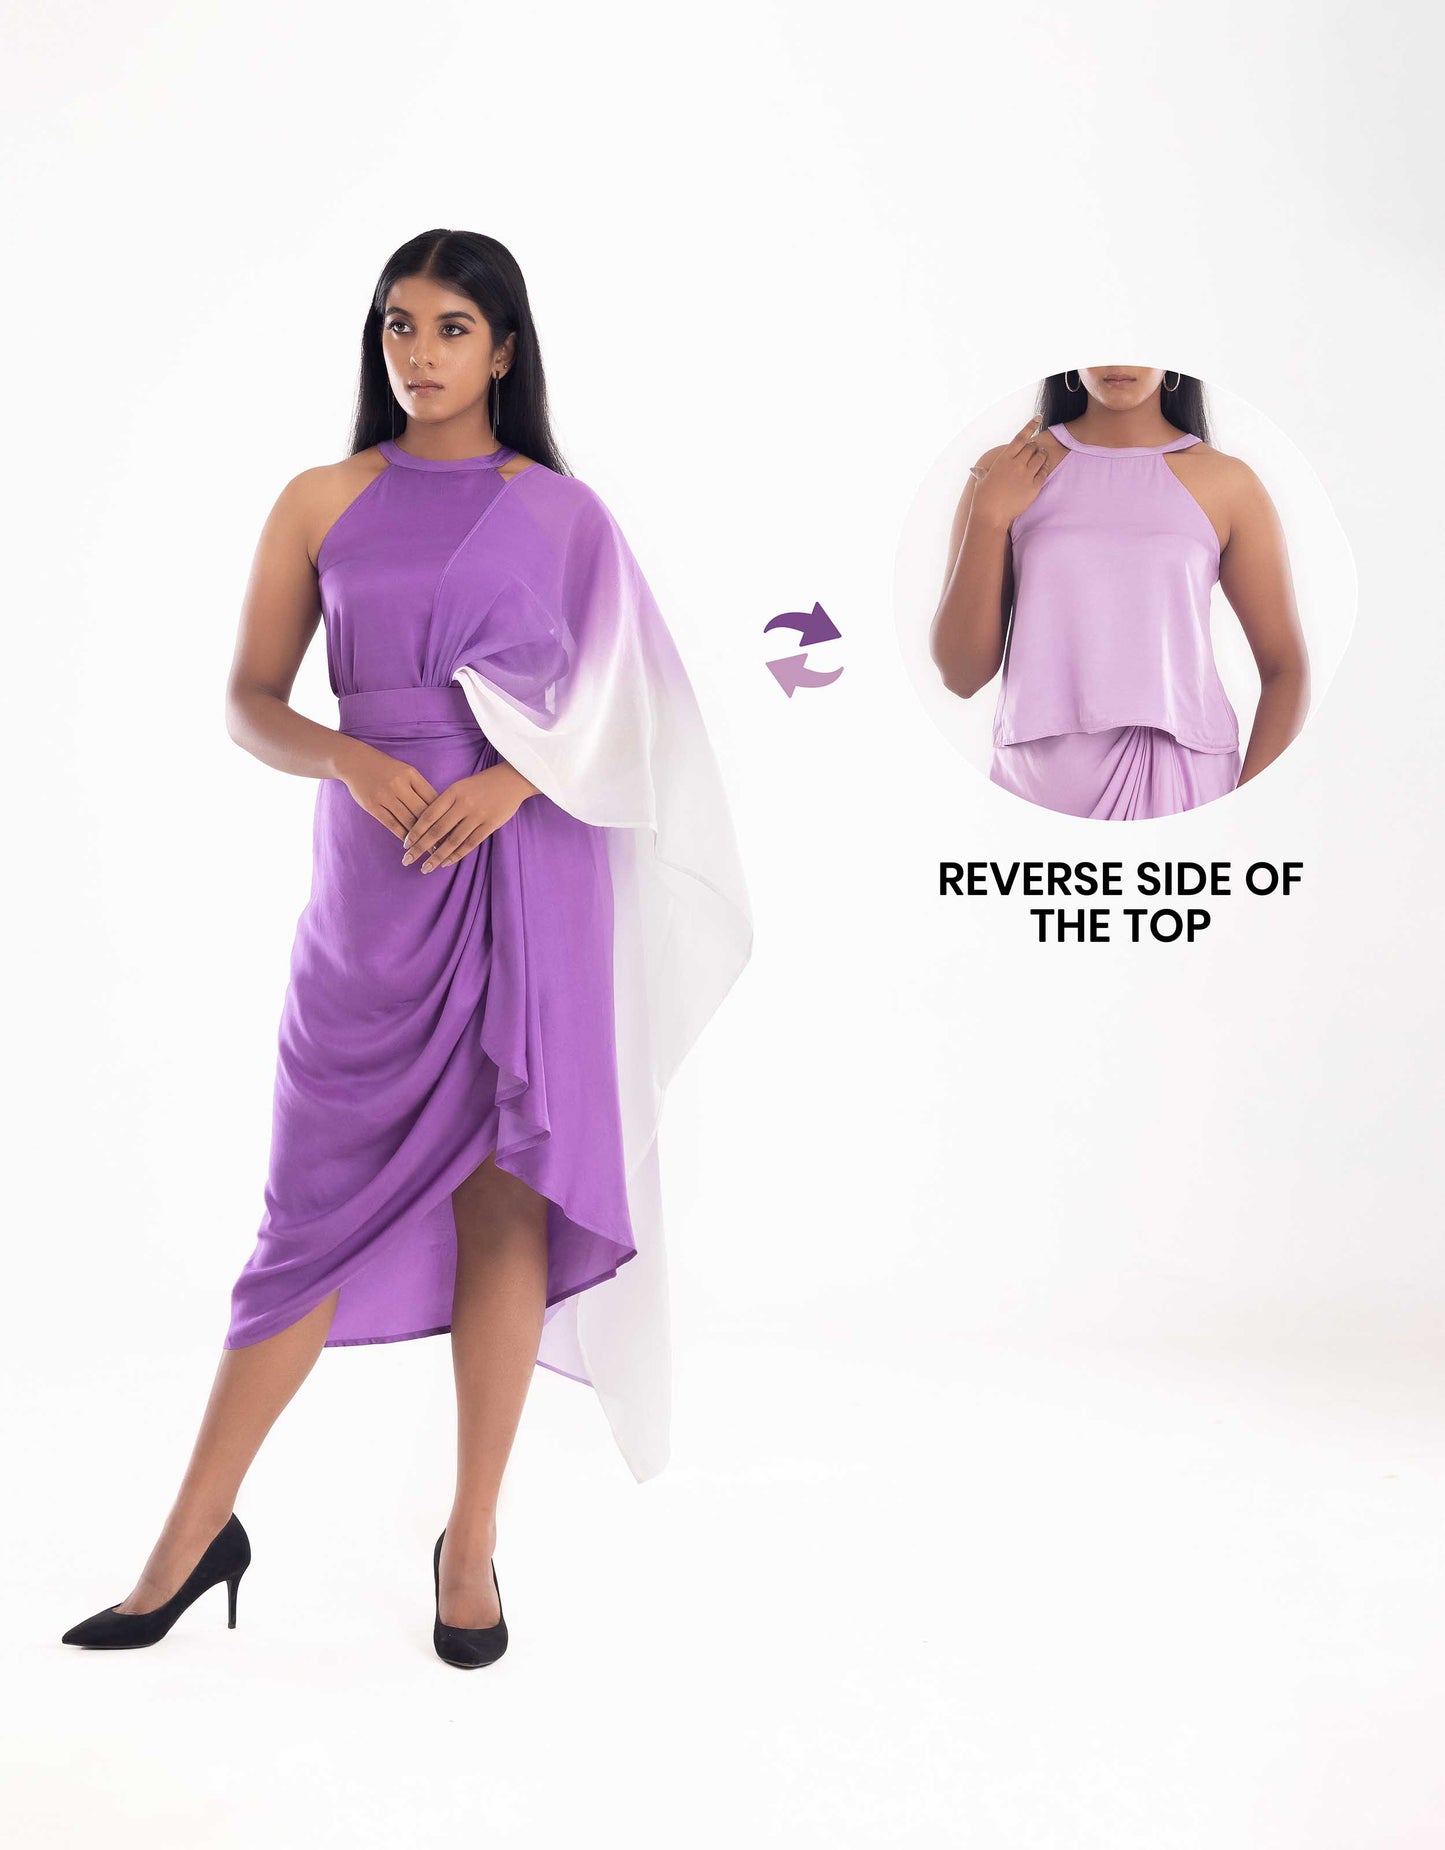 Hueloom purple Allure convertible capsule with top and skirt front view showing versatile reversible top option.